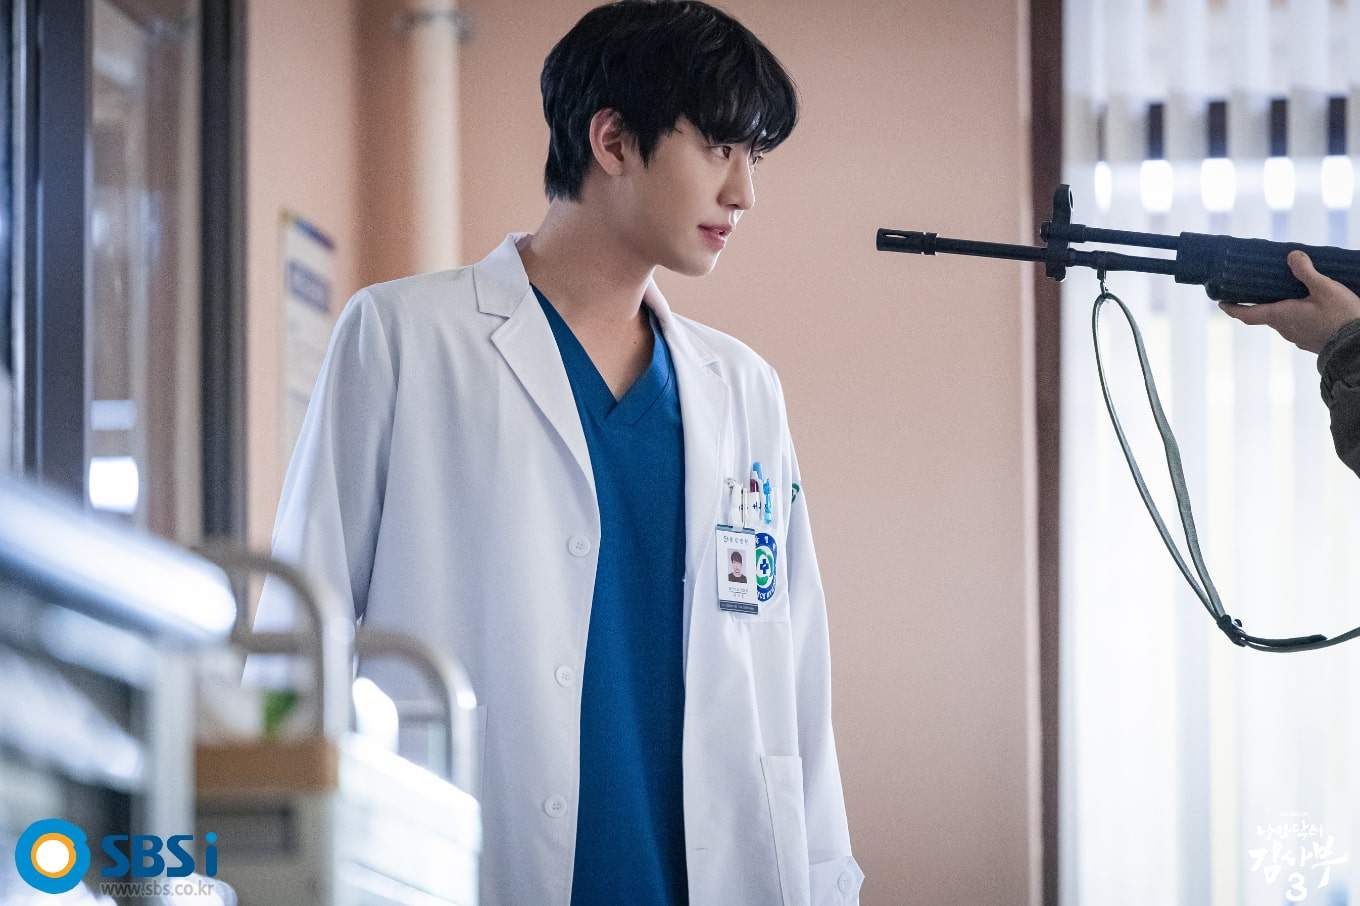 Doctor Romantic Season 3 Episode 9: Release Date, Preview & Streaming Guide